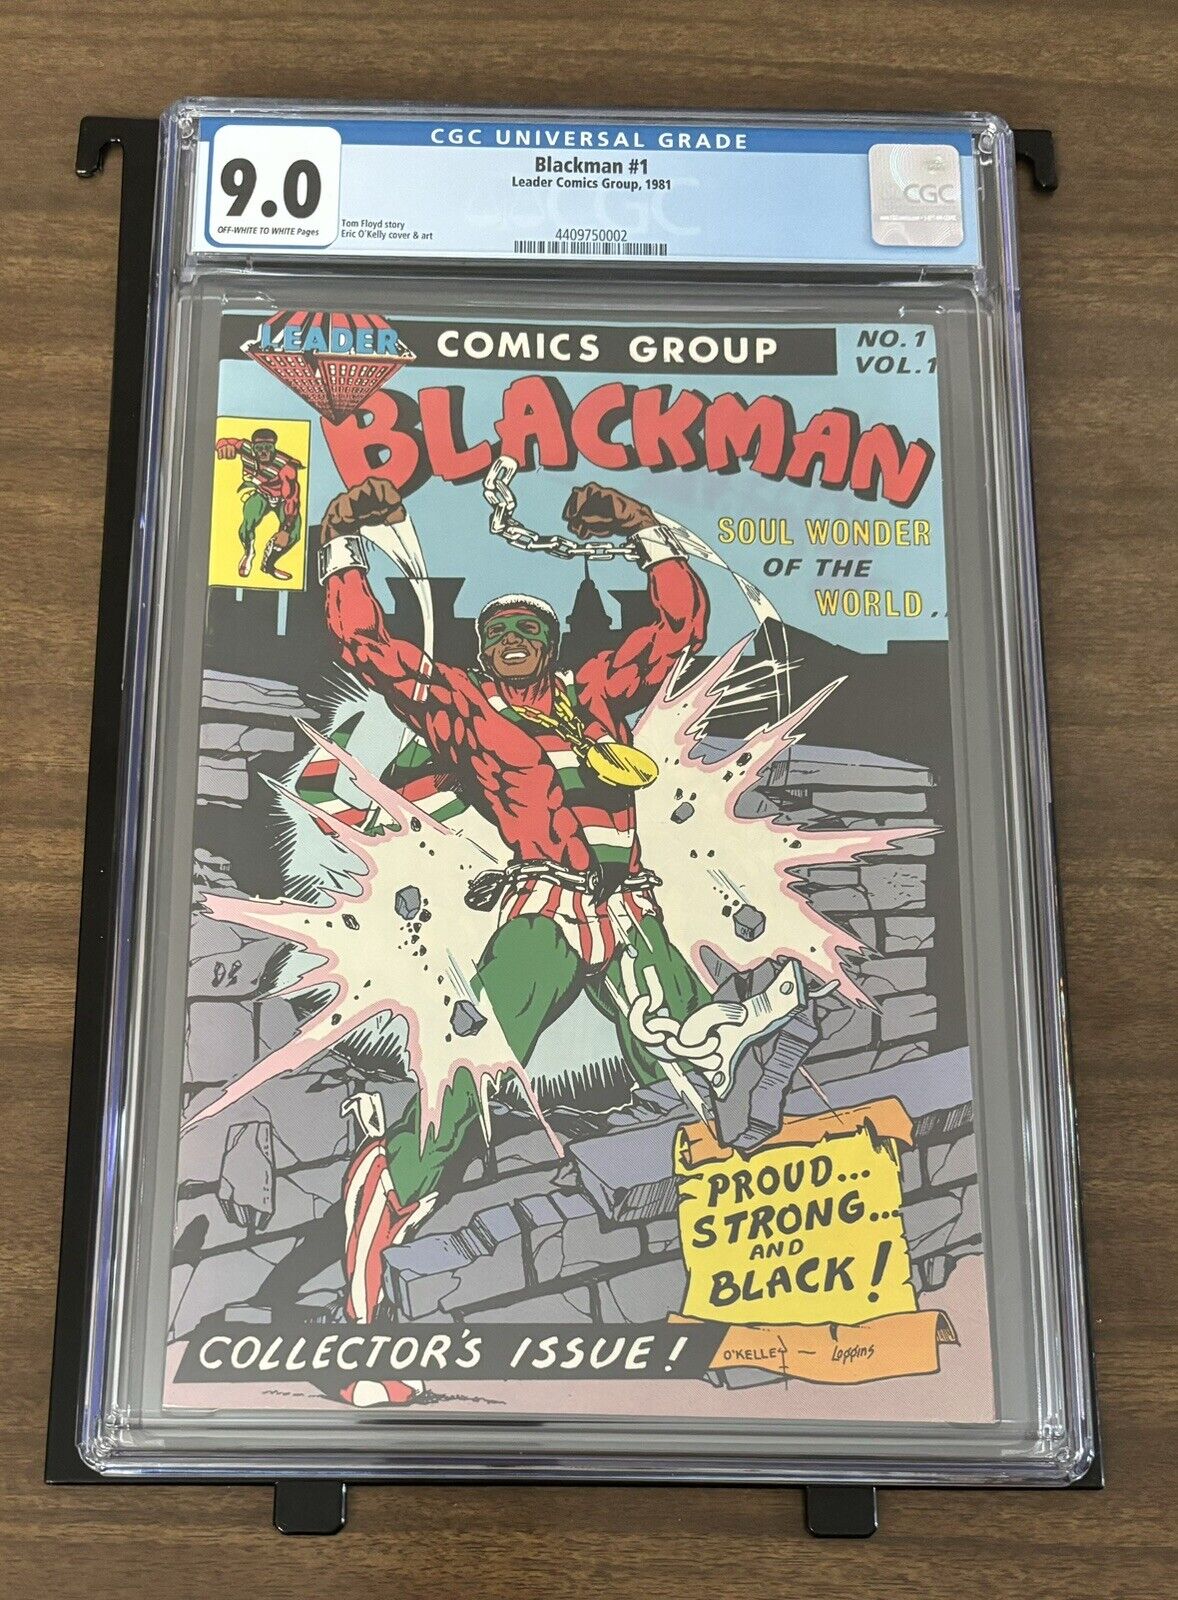 HIGHGRADE BLACKMAN #1 CGC 9.0 Leader Comics Group Uncirculated COLLECTOR'S ISSUE